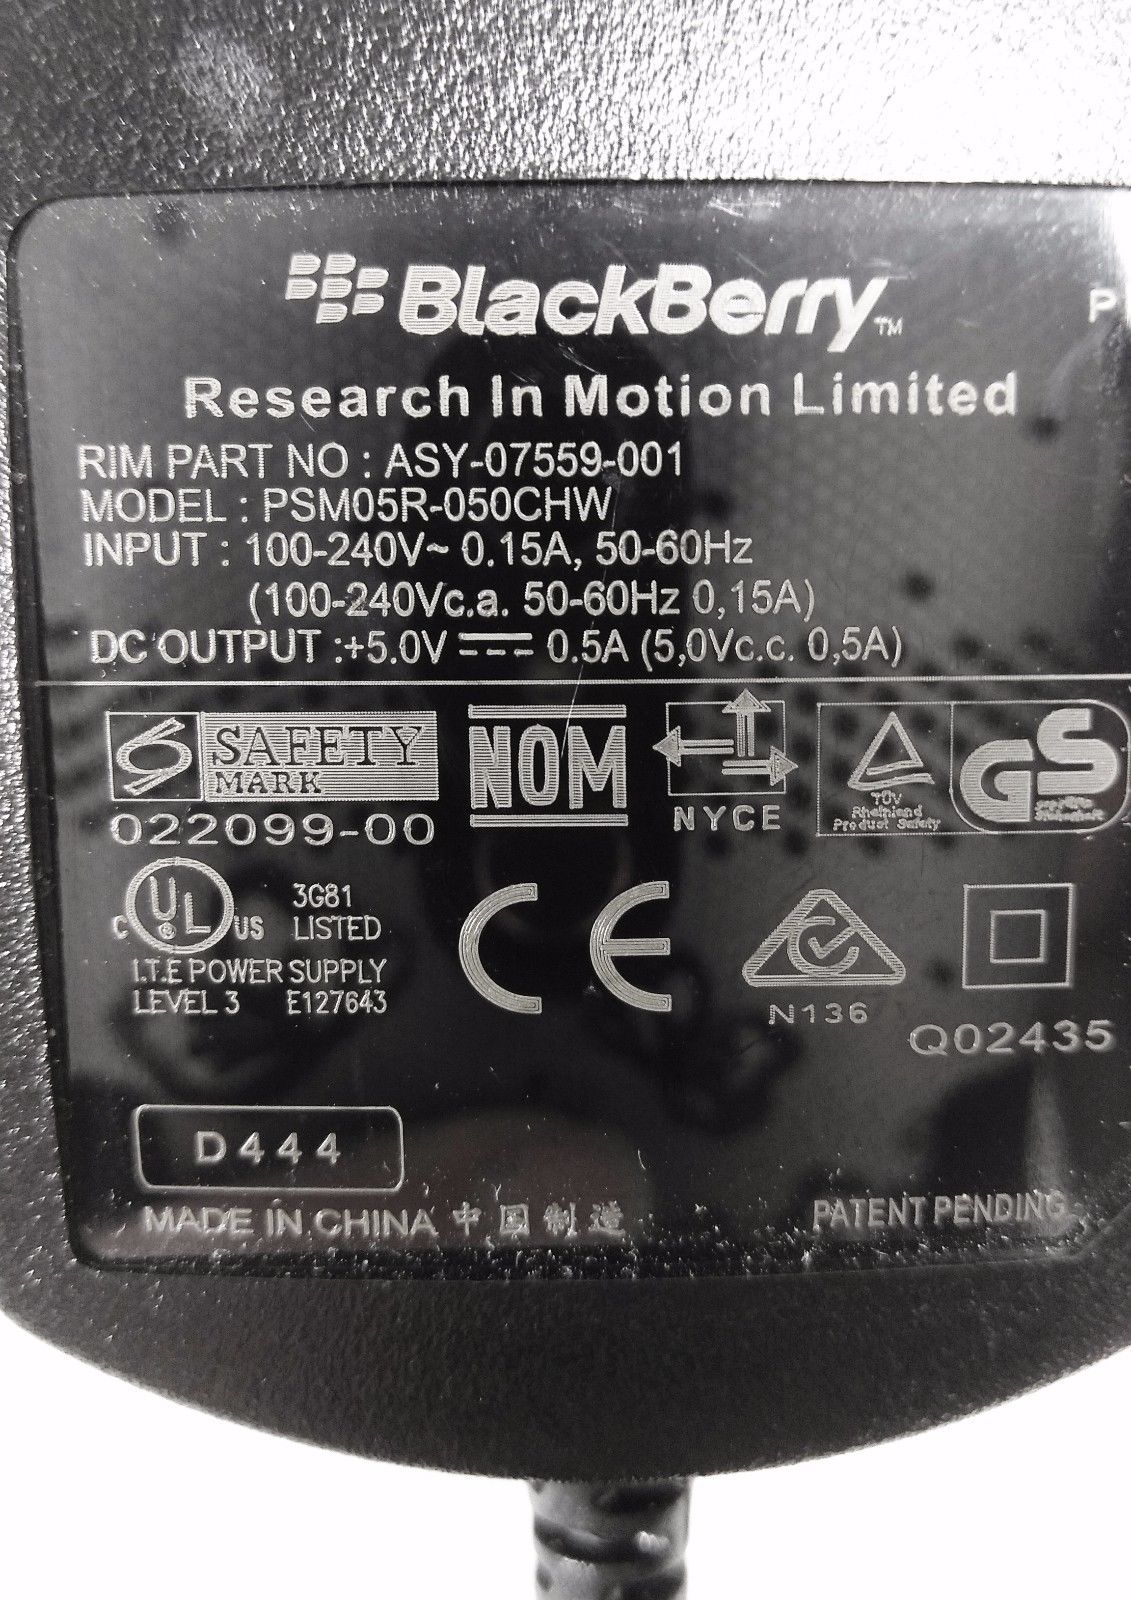 NEW 5V 0.5A BlackBerry PSM05R-050CHW ASY-07559-001 AC Adapter